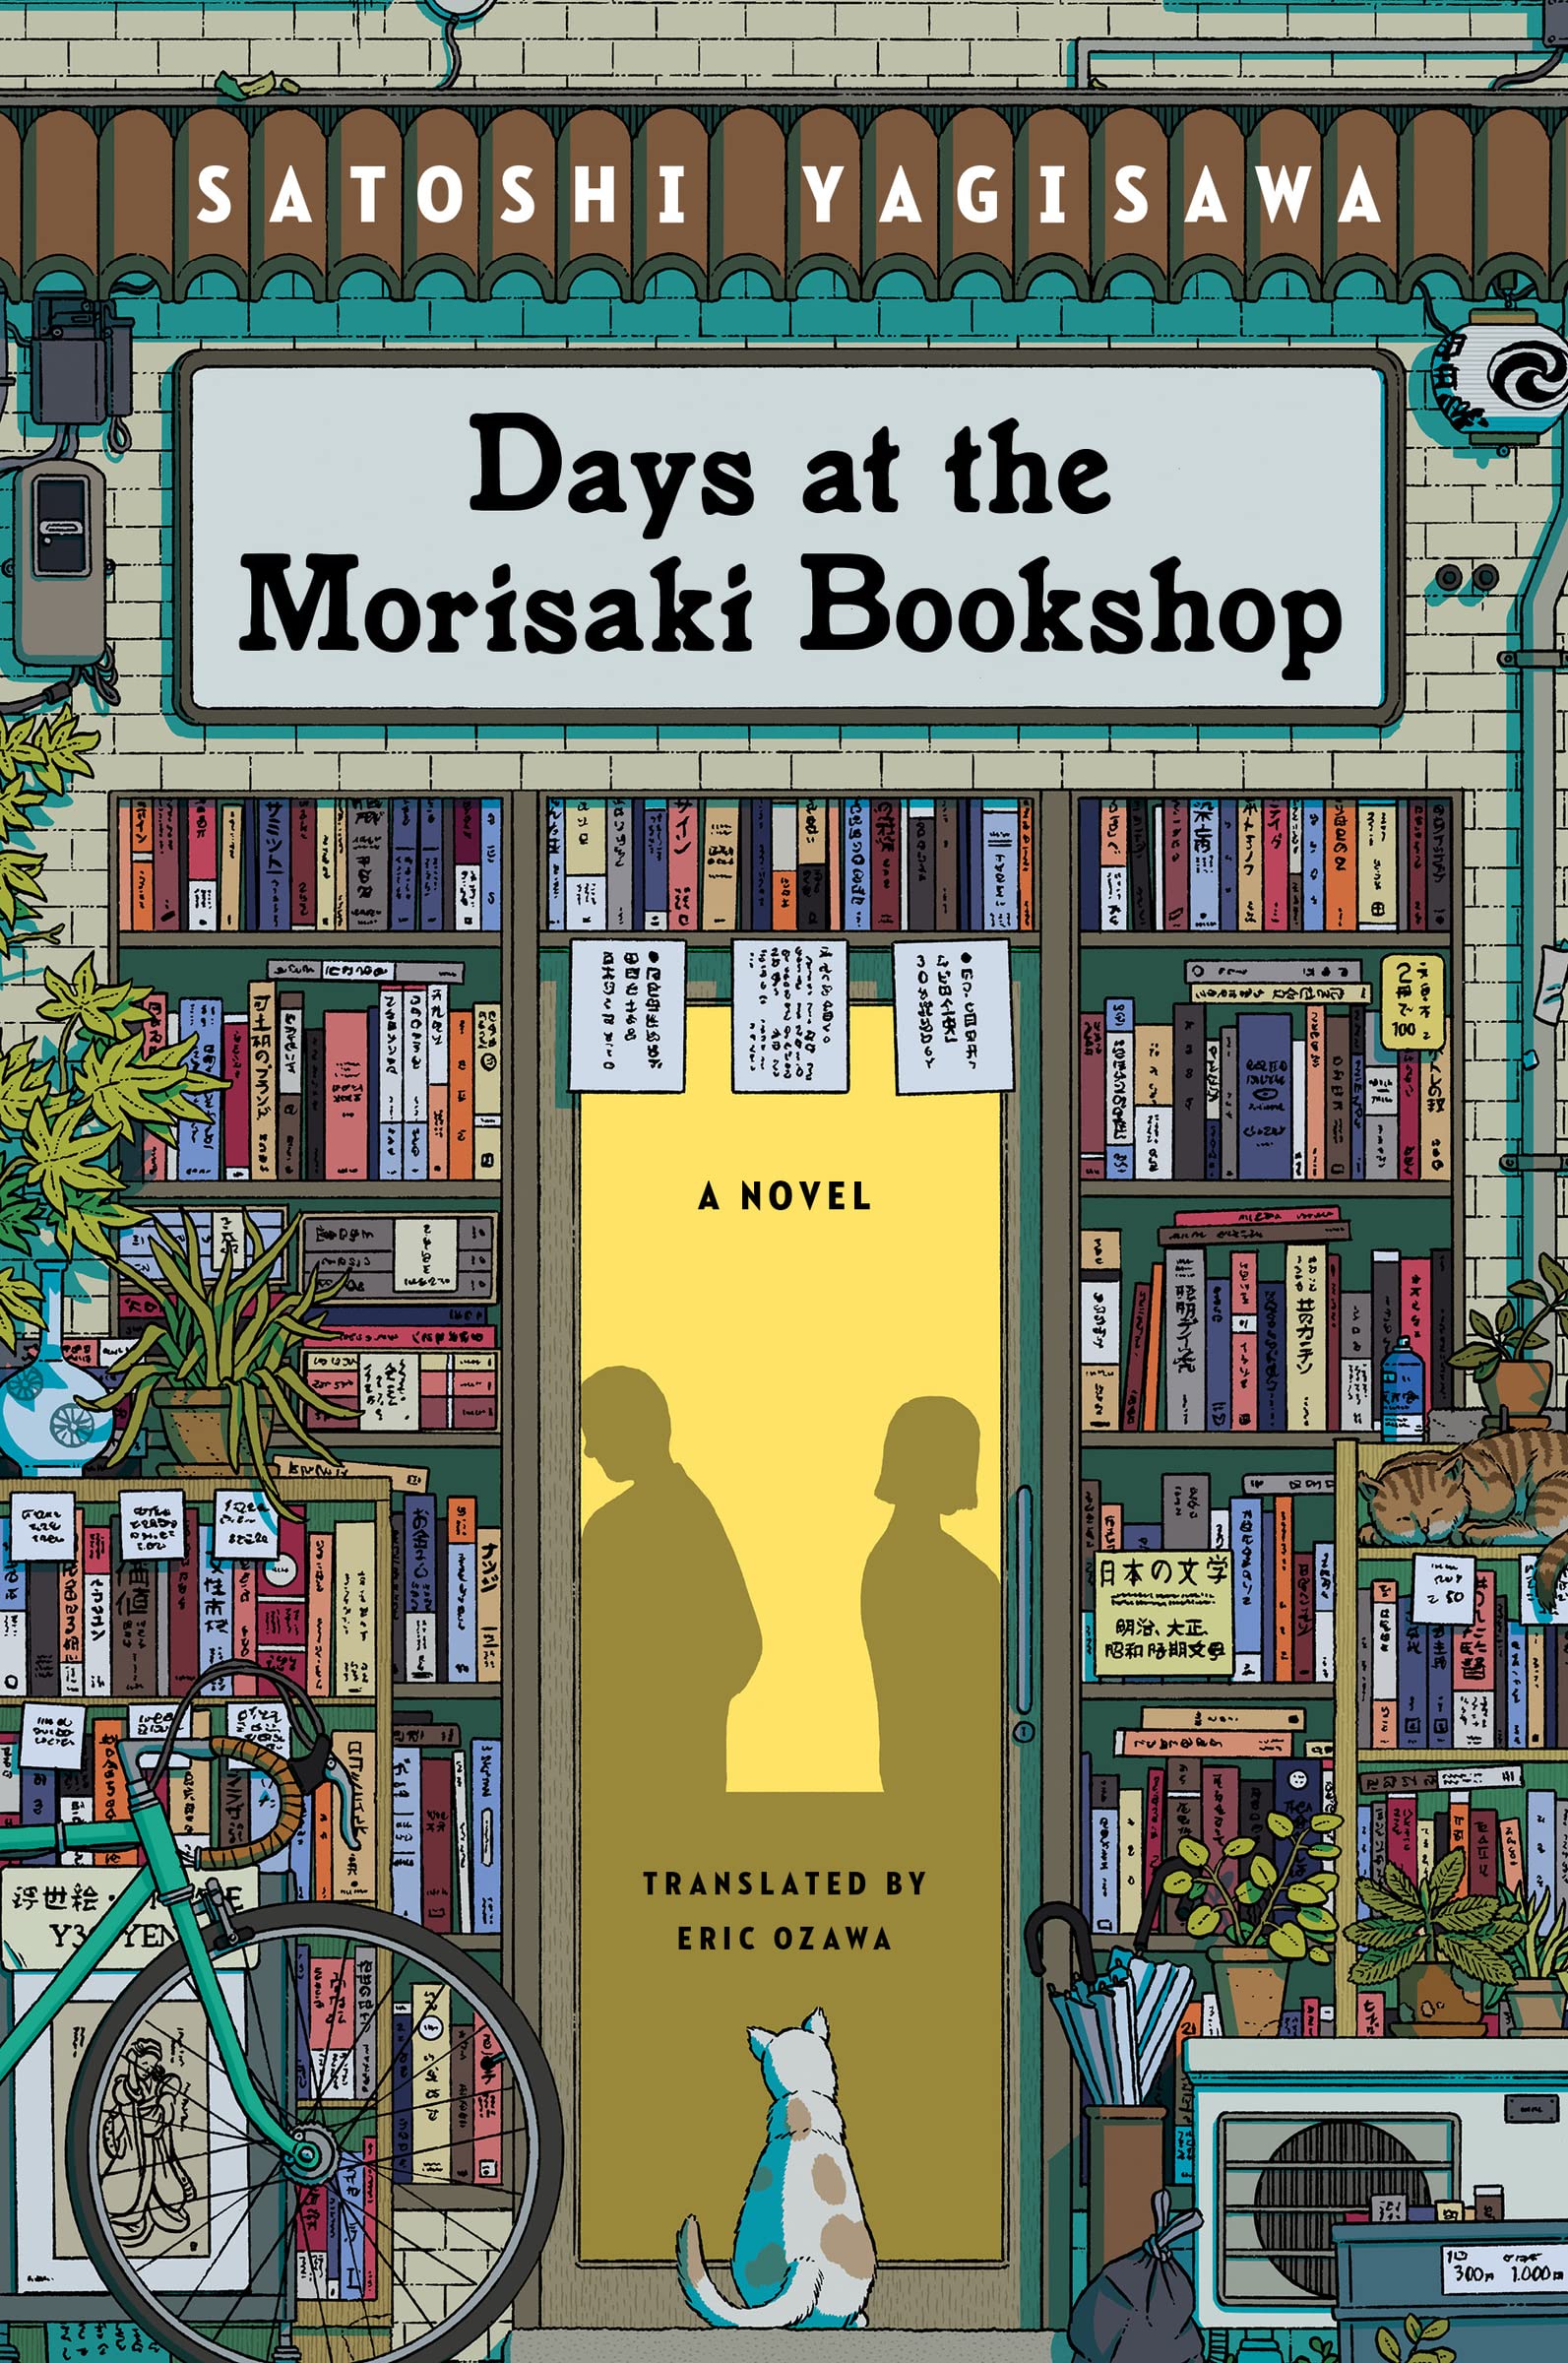 One of our recommended books is Days at the Morisaki Bookshop by Satoshi Yagisawa